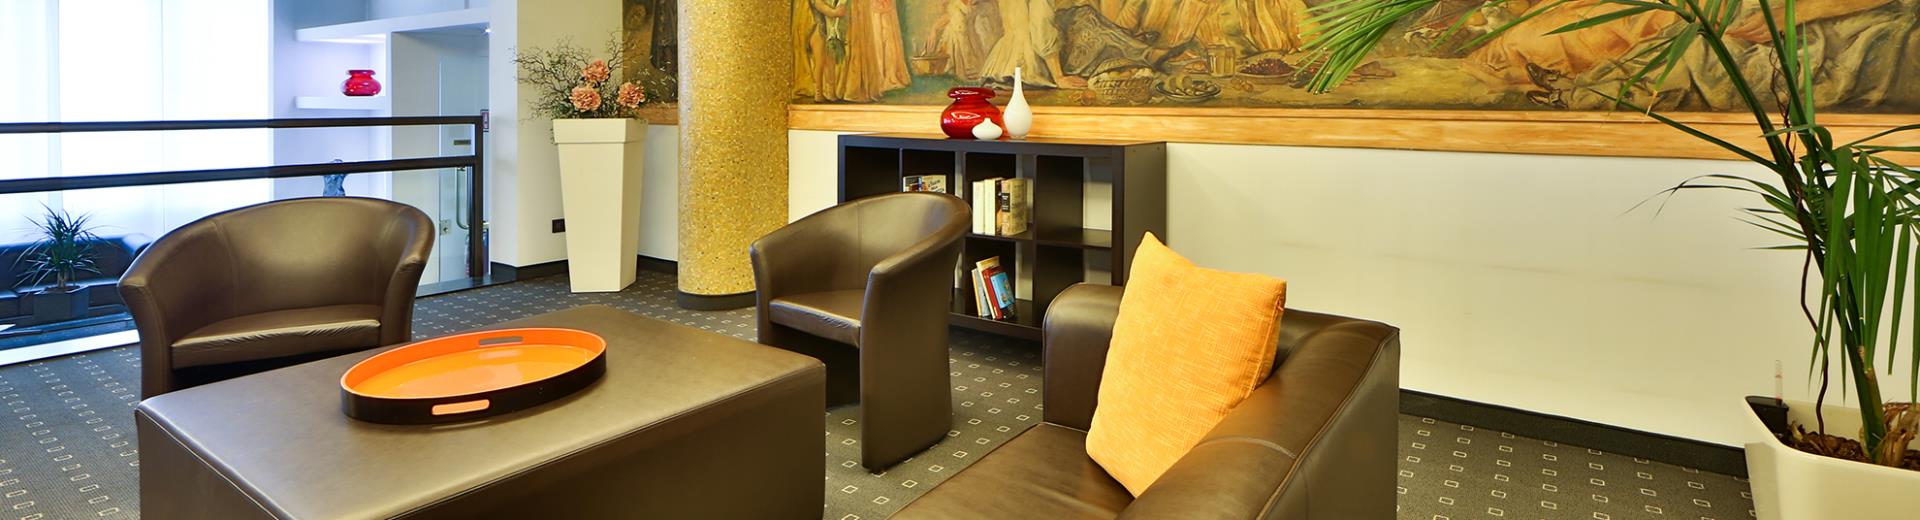 Relax in our Lounge Bar after a busy day: Best Western Hotel Biri, 4-star in Padua, is also perfect for a drink!